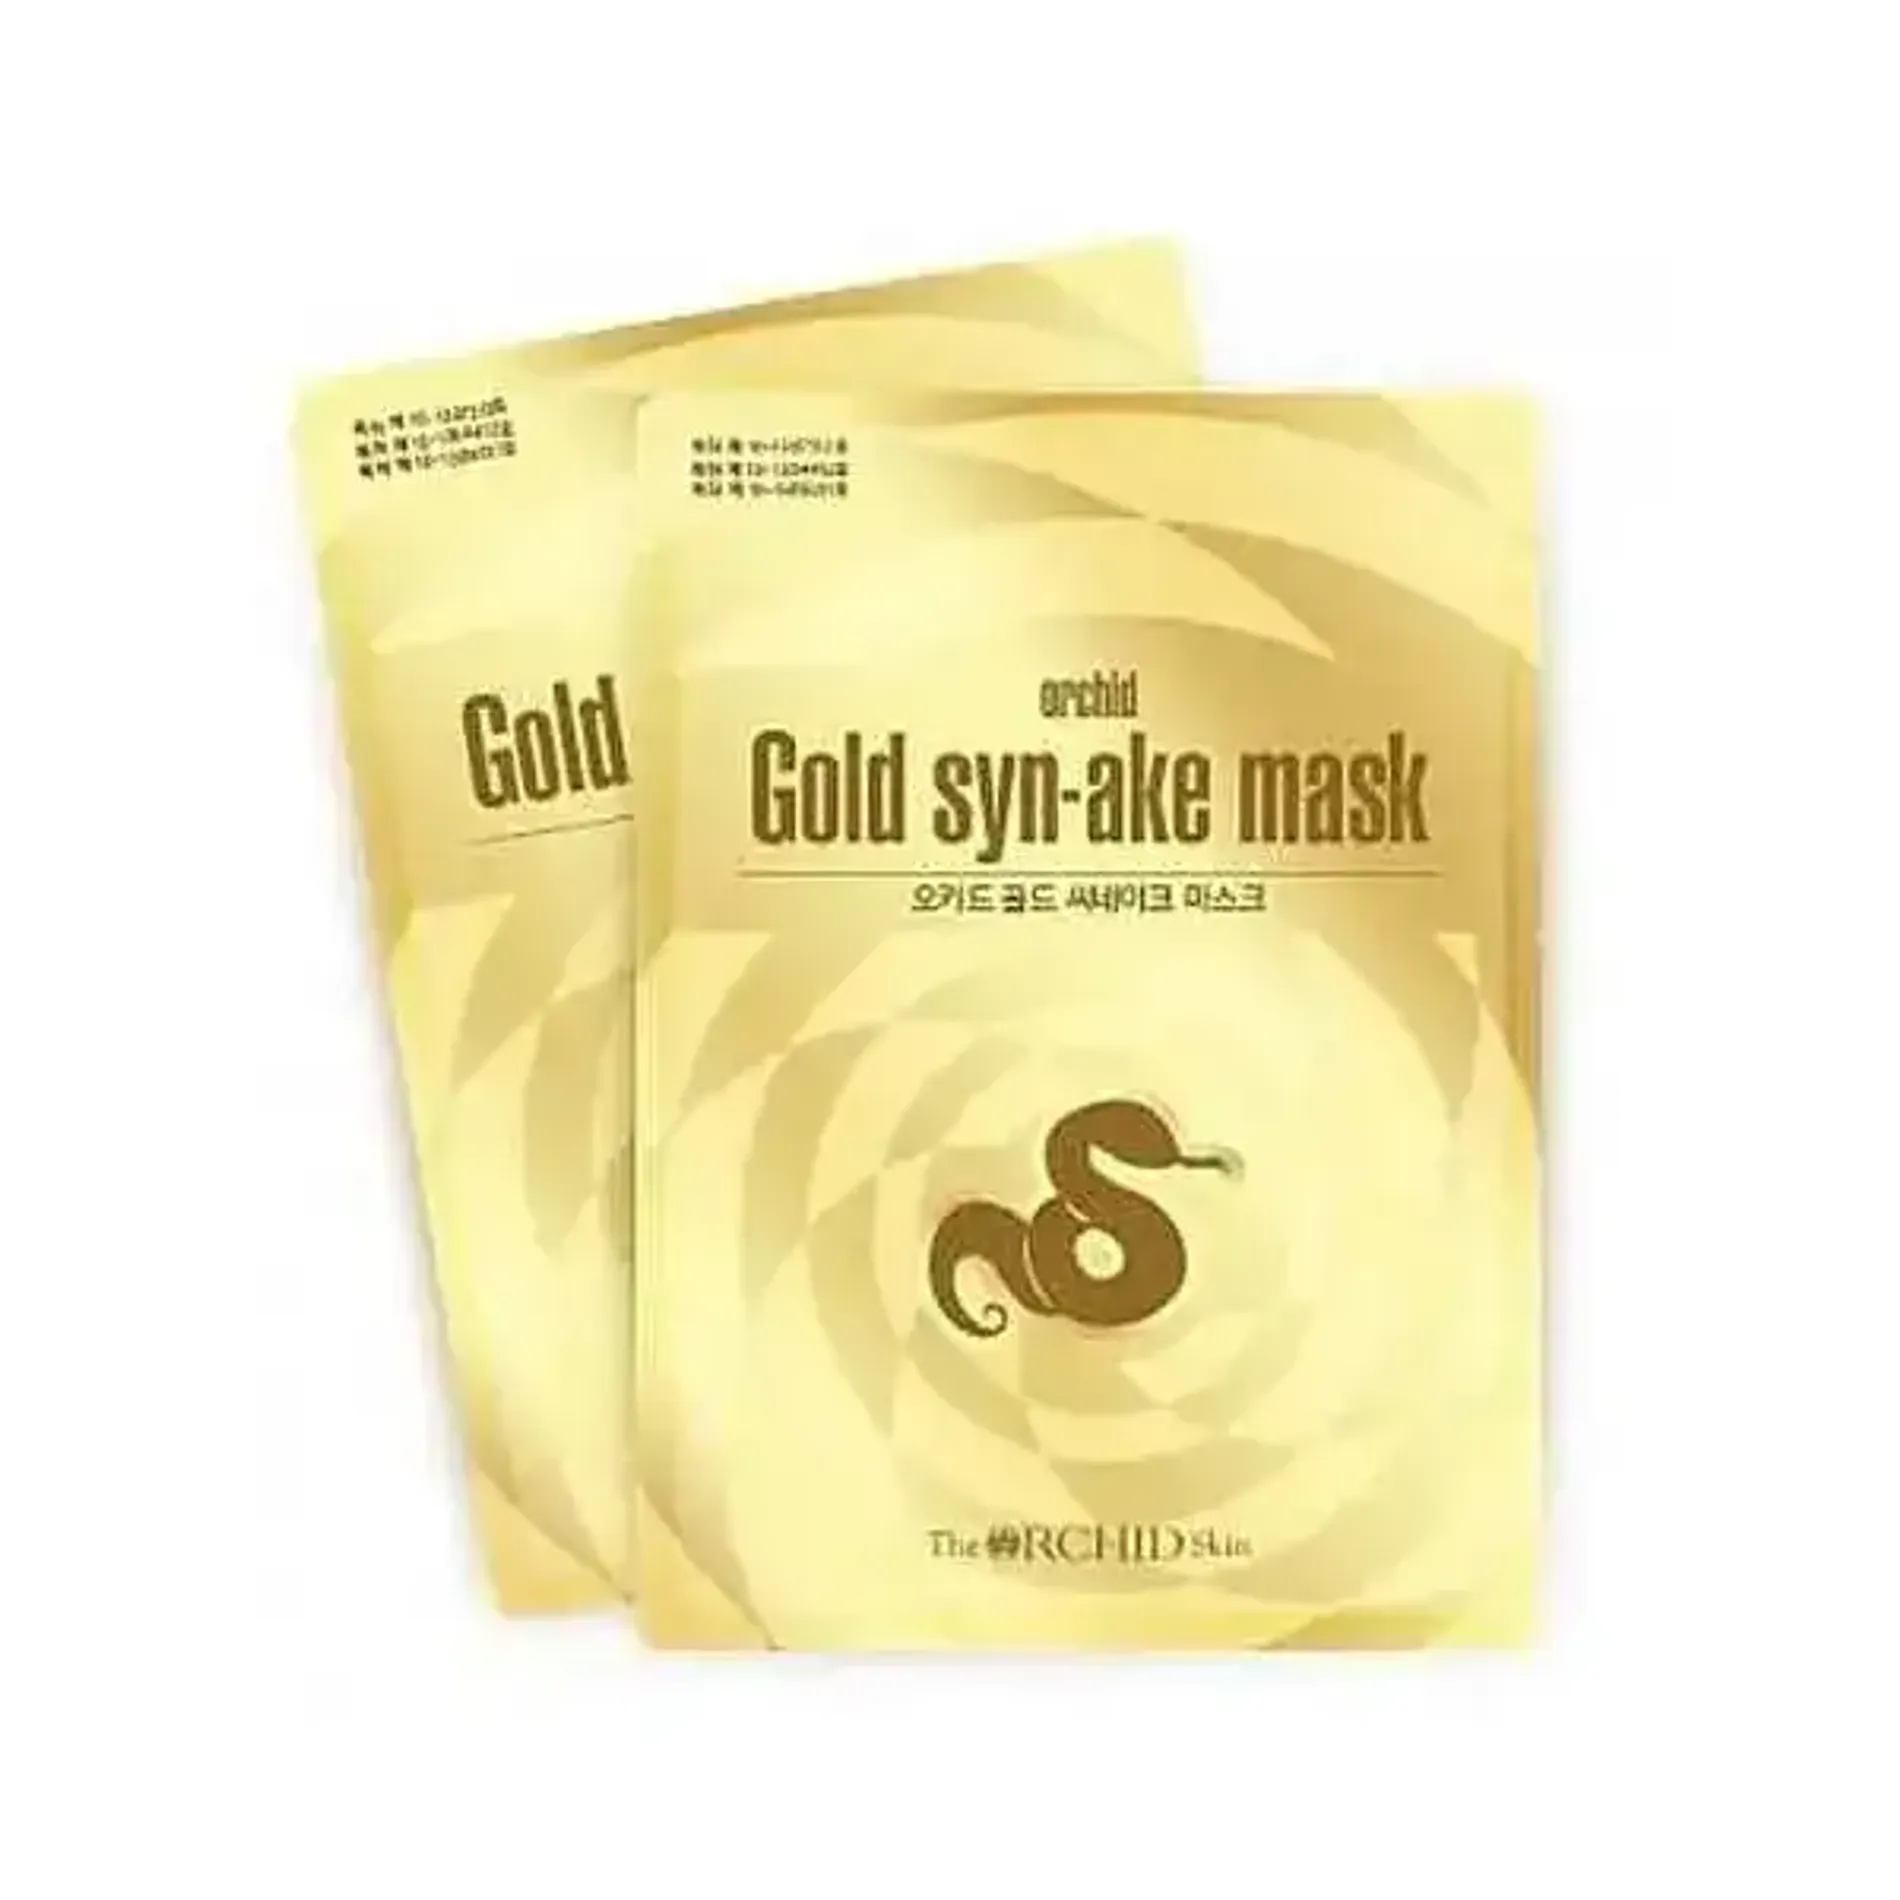 mat-na-giay-the-orchid-skin-gold-syn-ake-mask-1